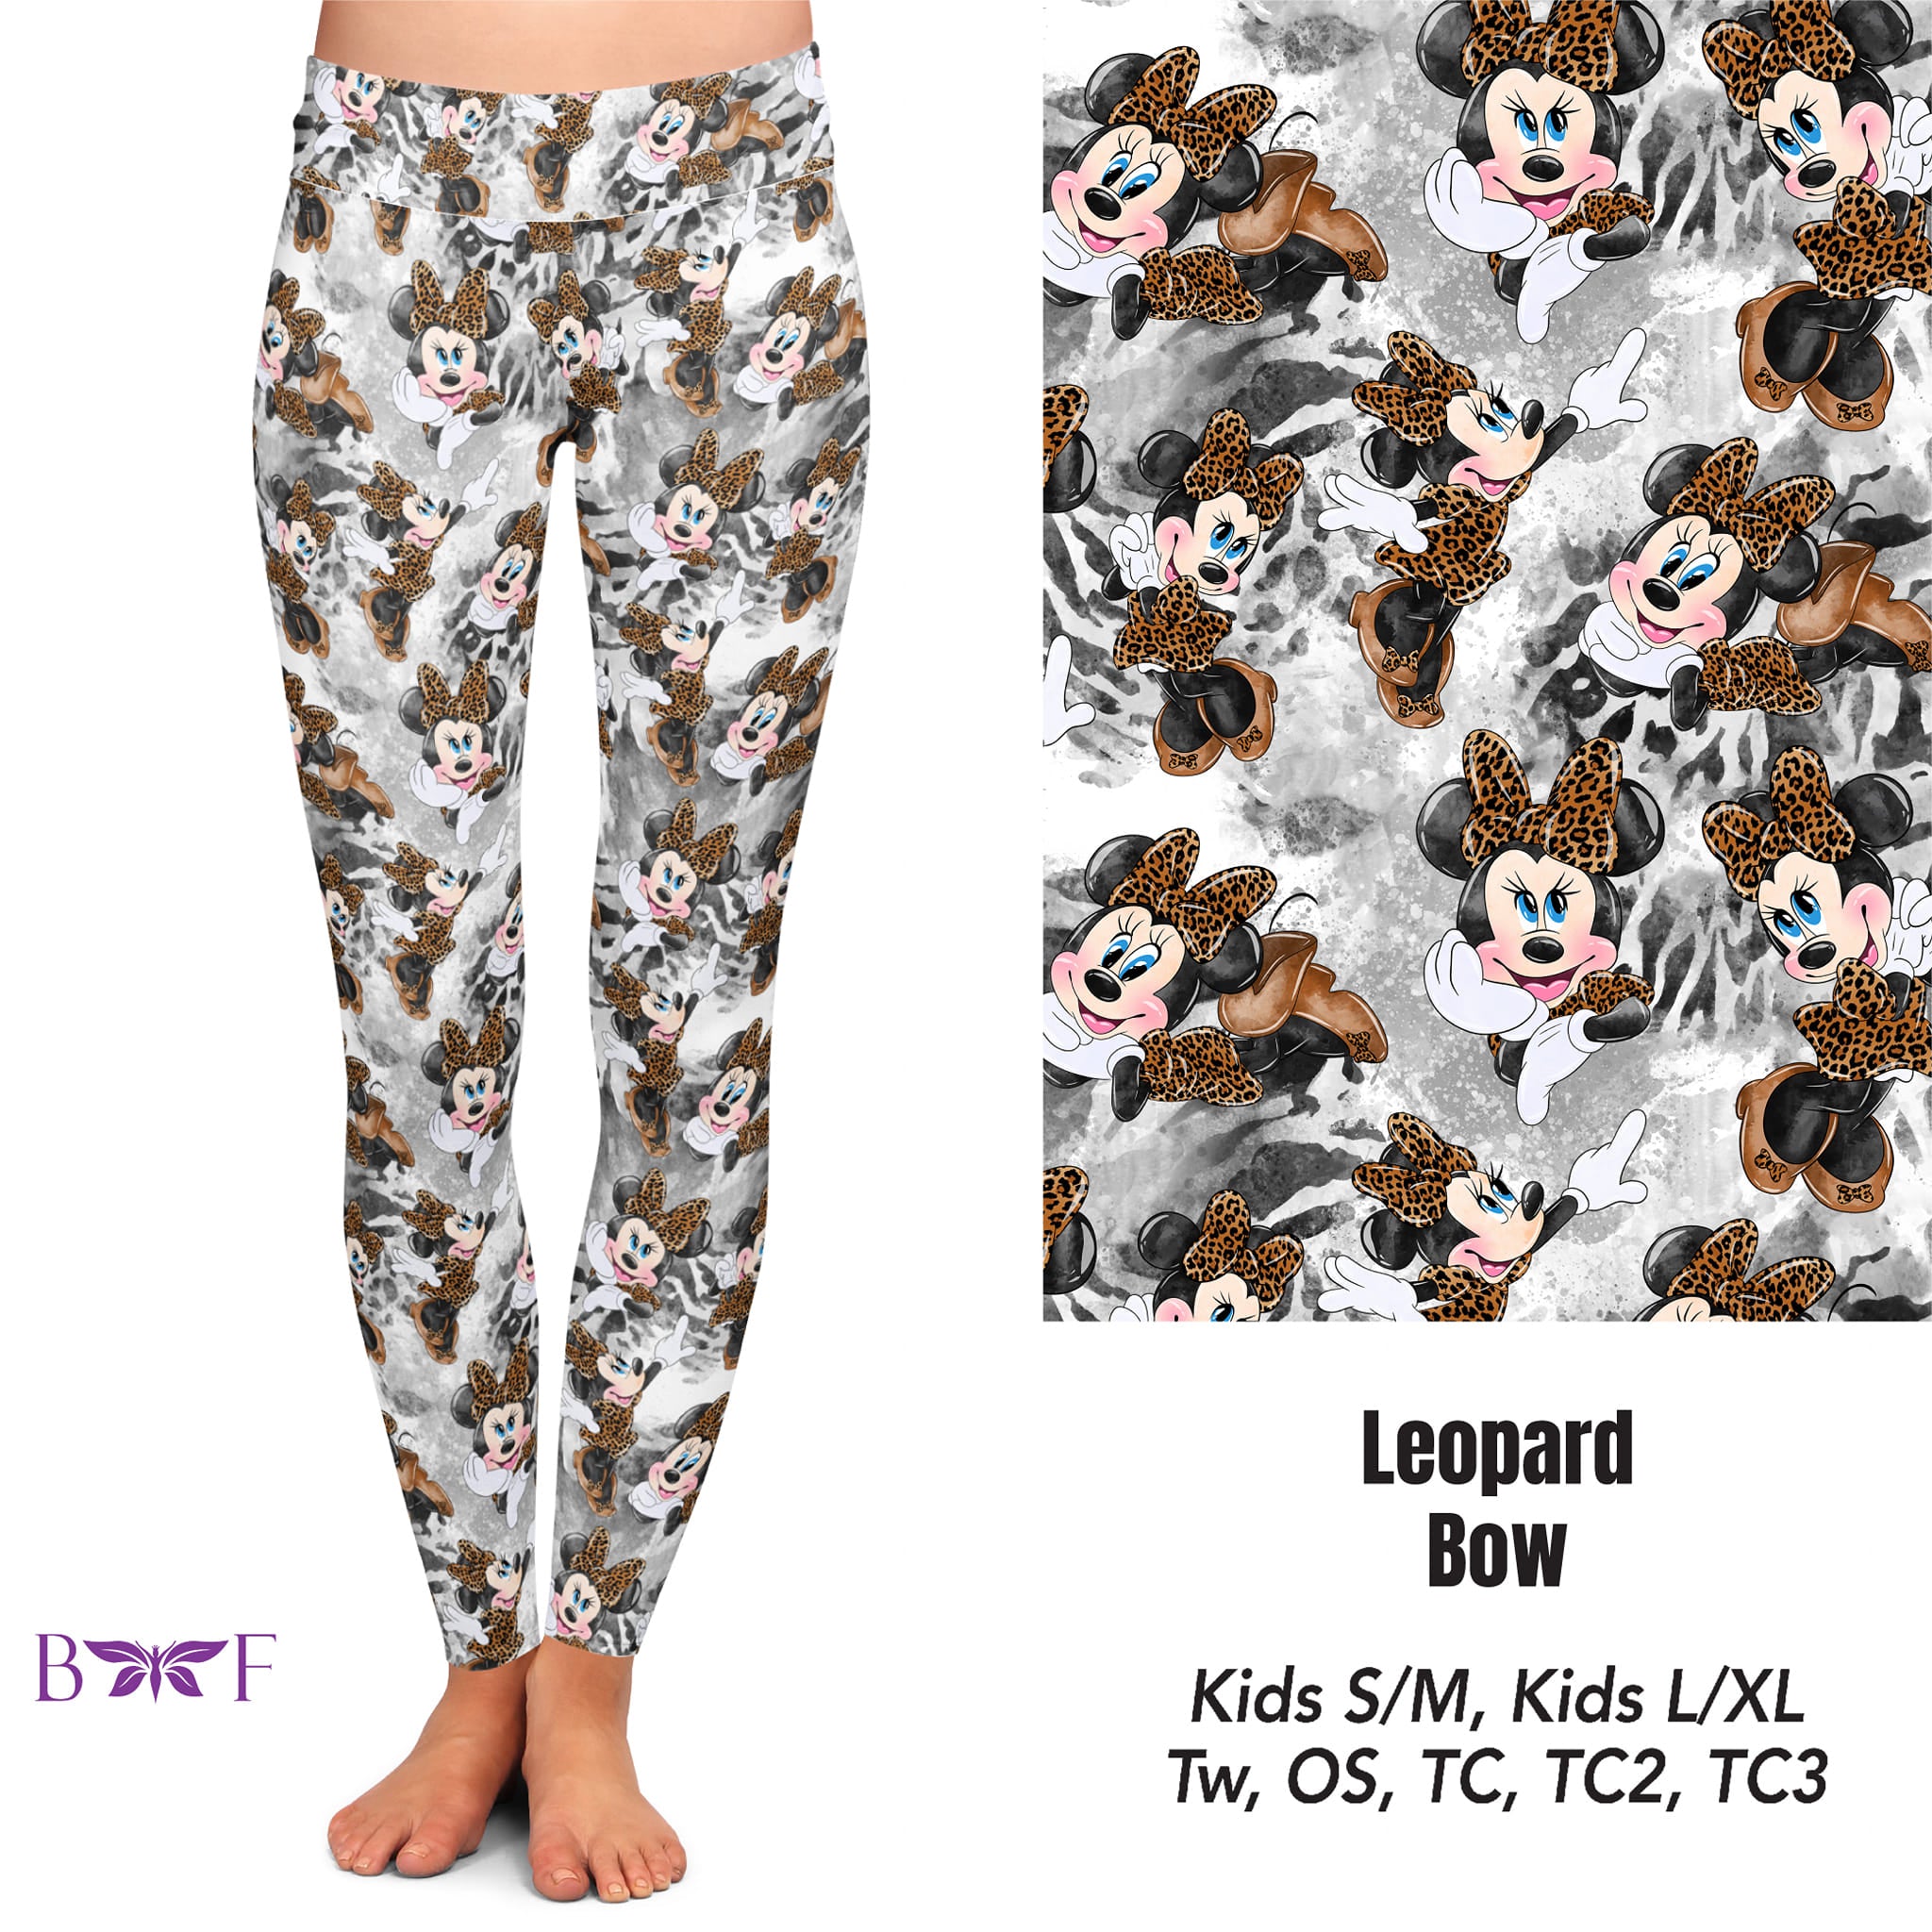 Leopard Bow Leggings and Capris with pockets and biker shorts